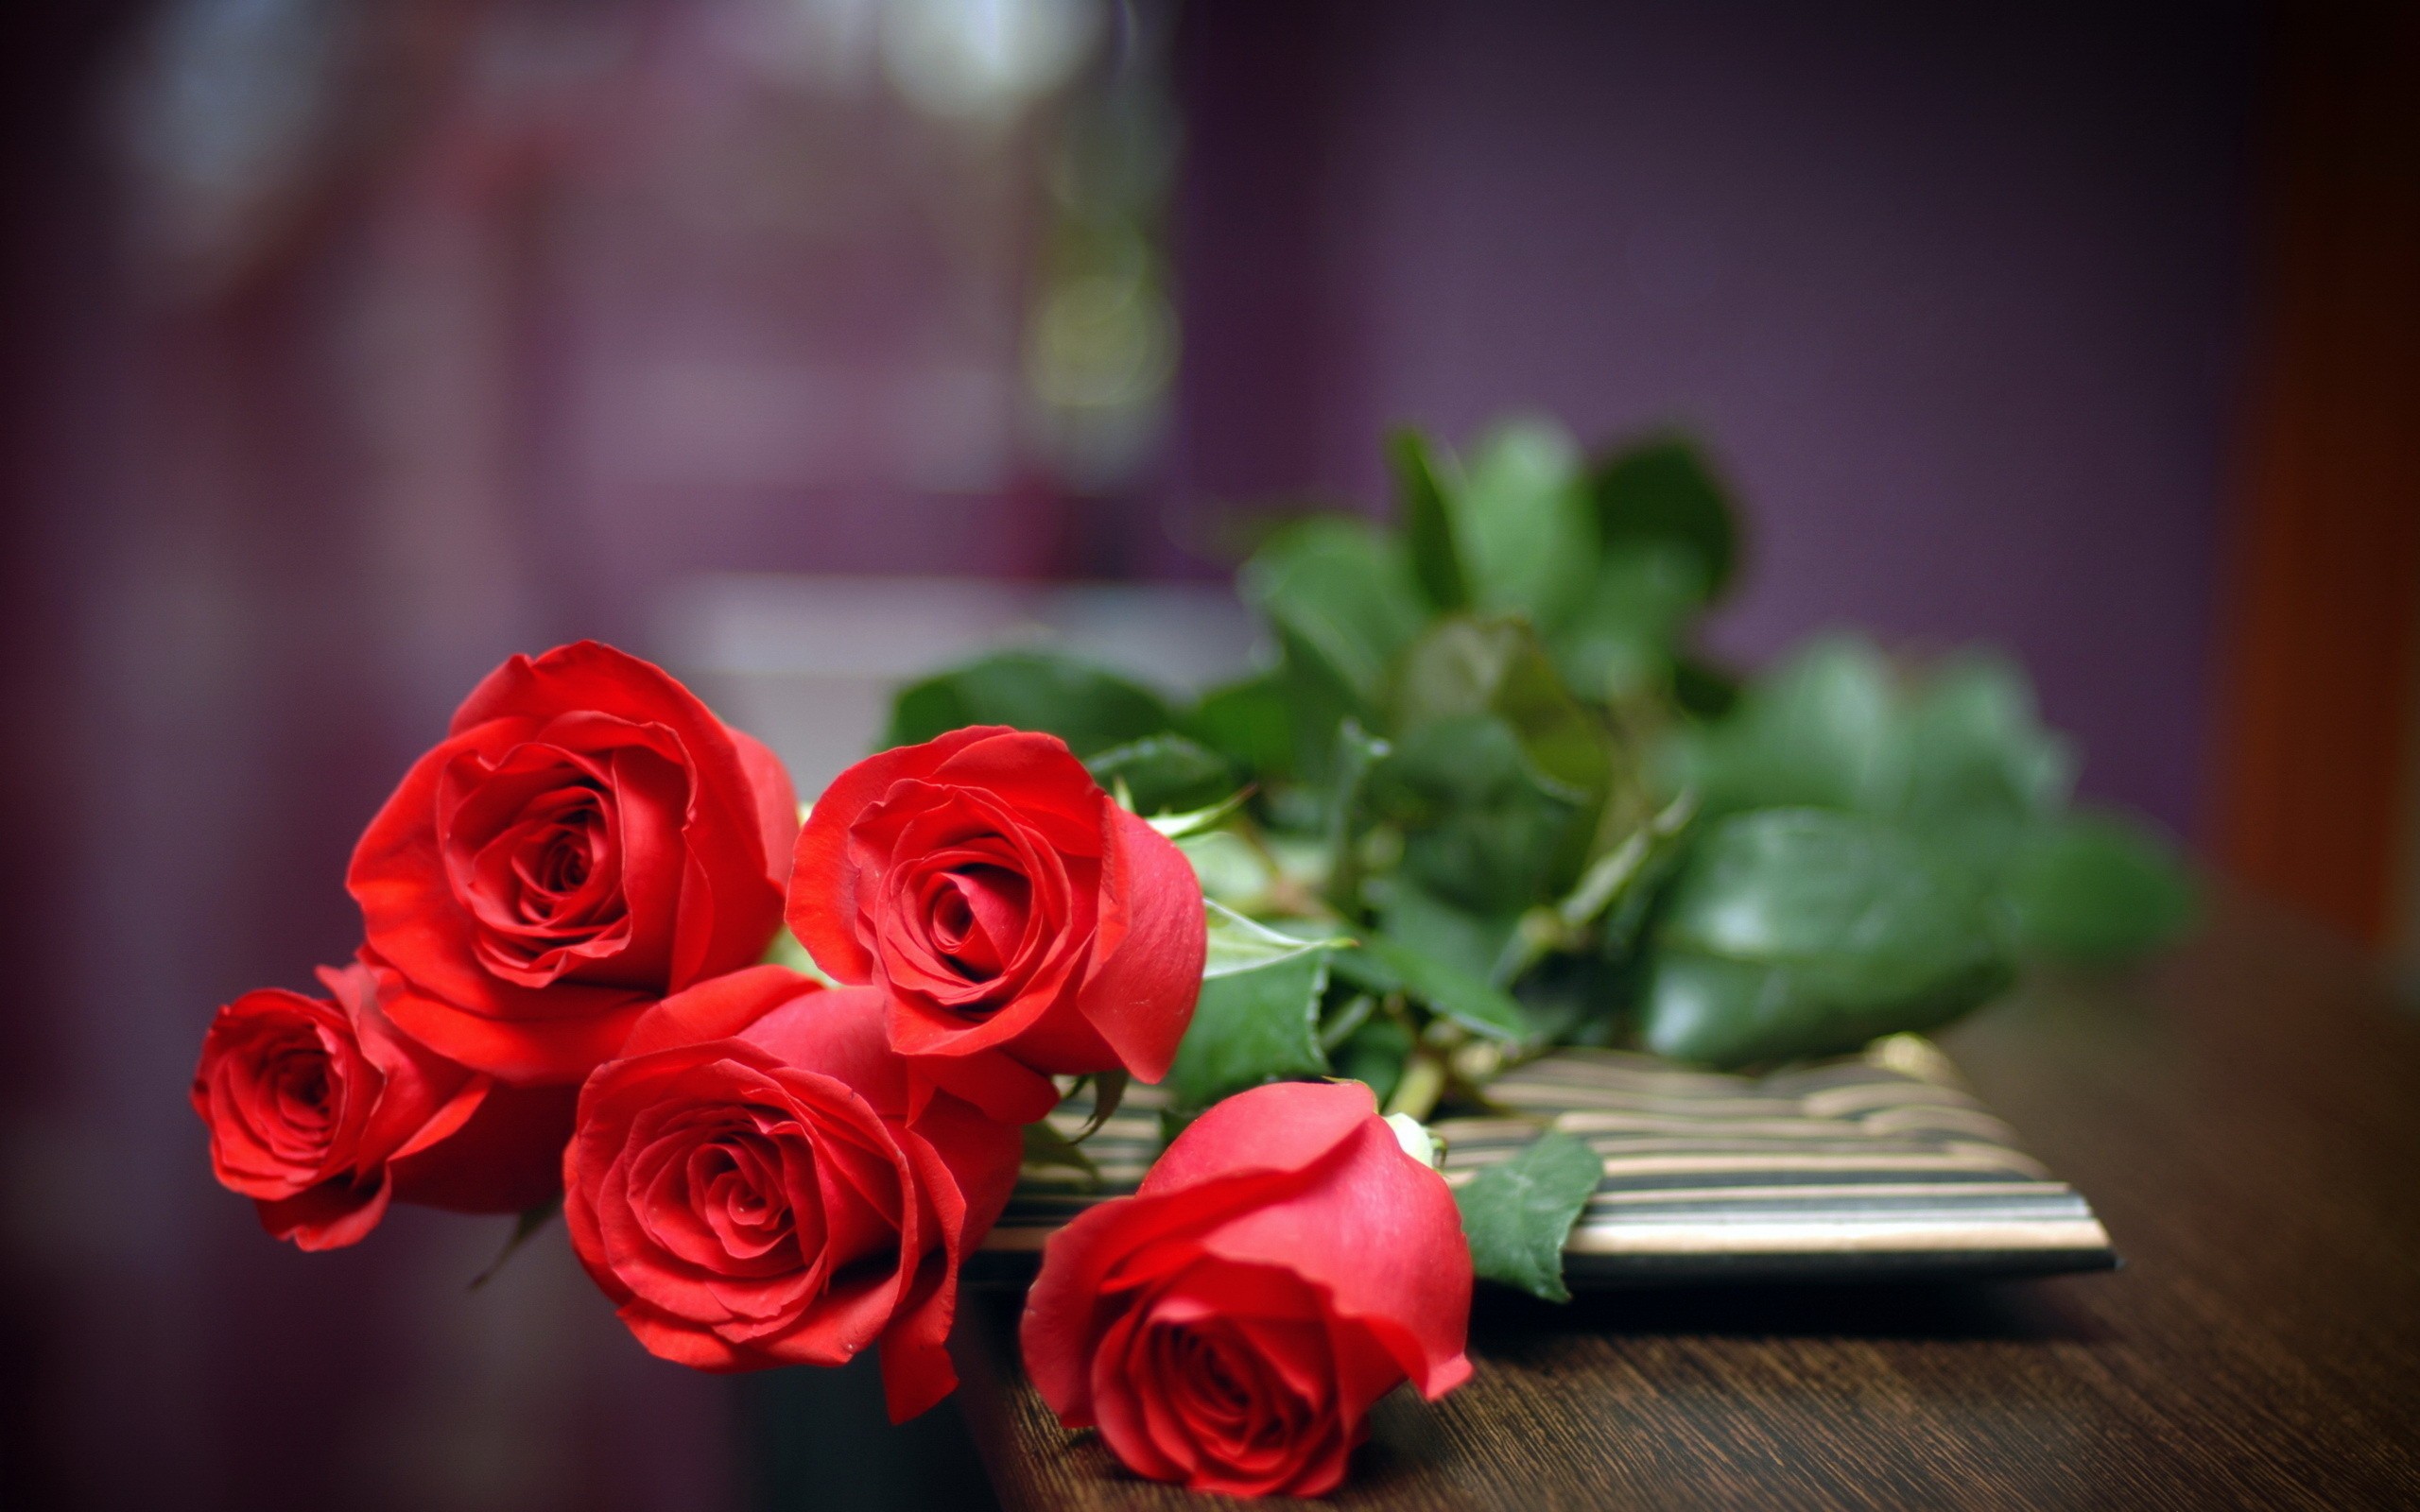 Bouquet of red roses wallpapers and images - wallpapers ...